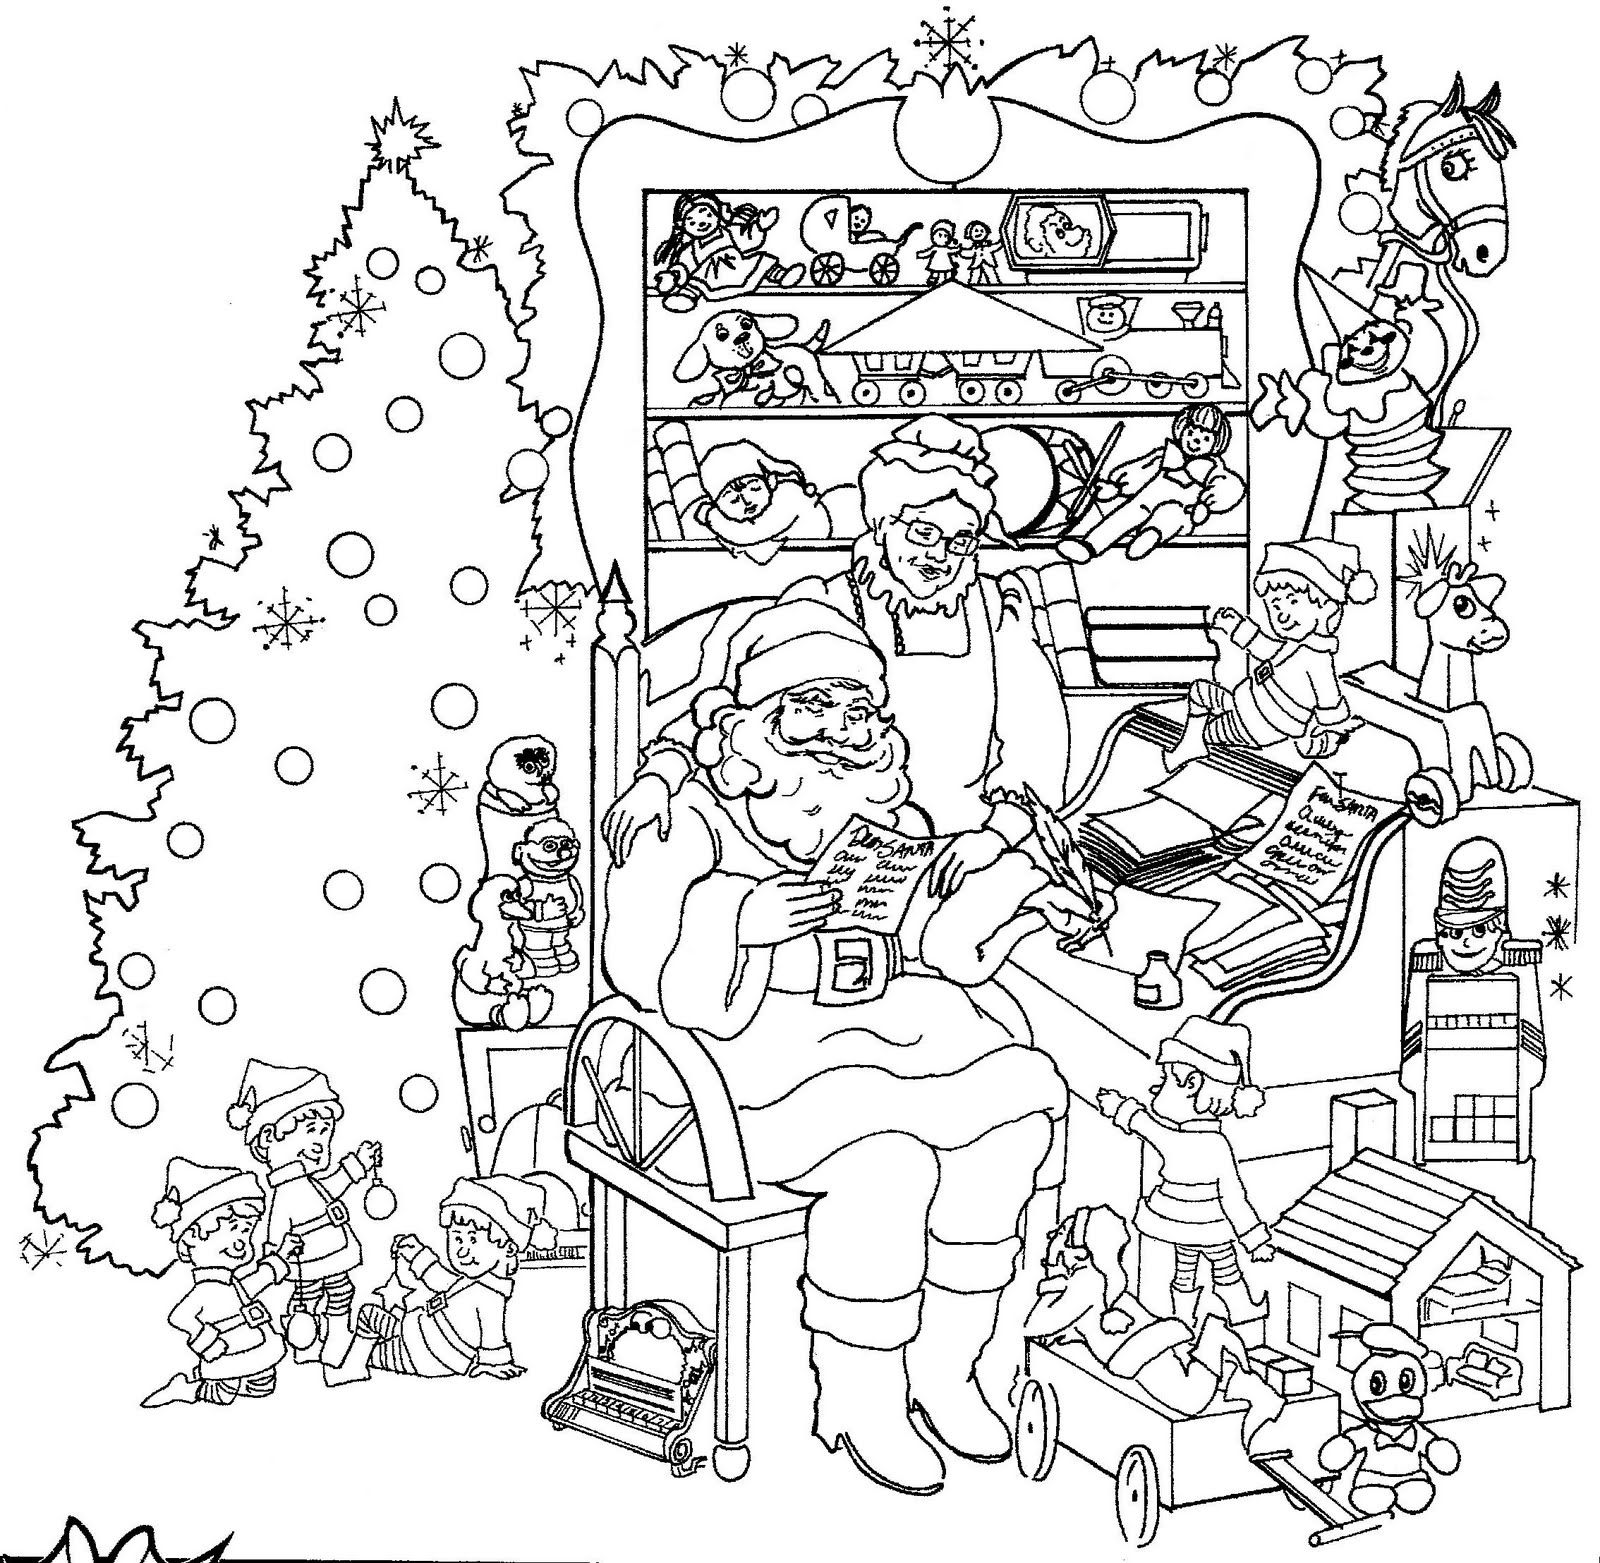 Intricate Christmas Coloring Pages - Coloring Page